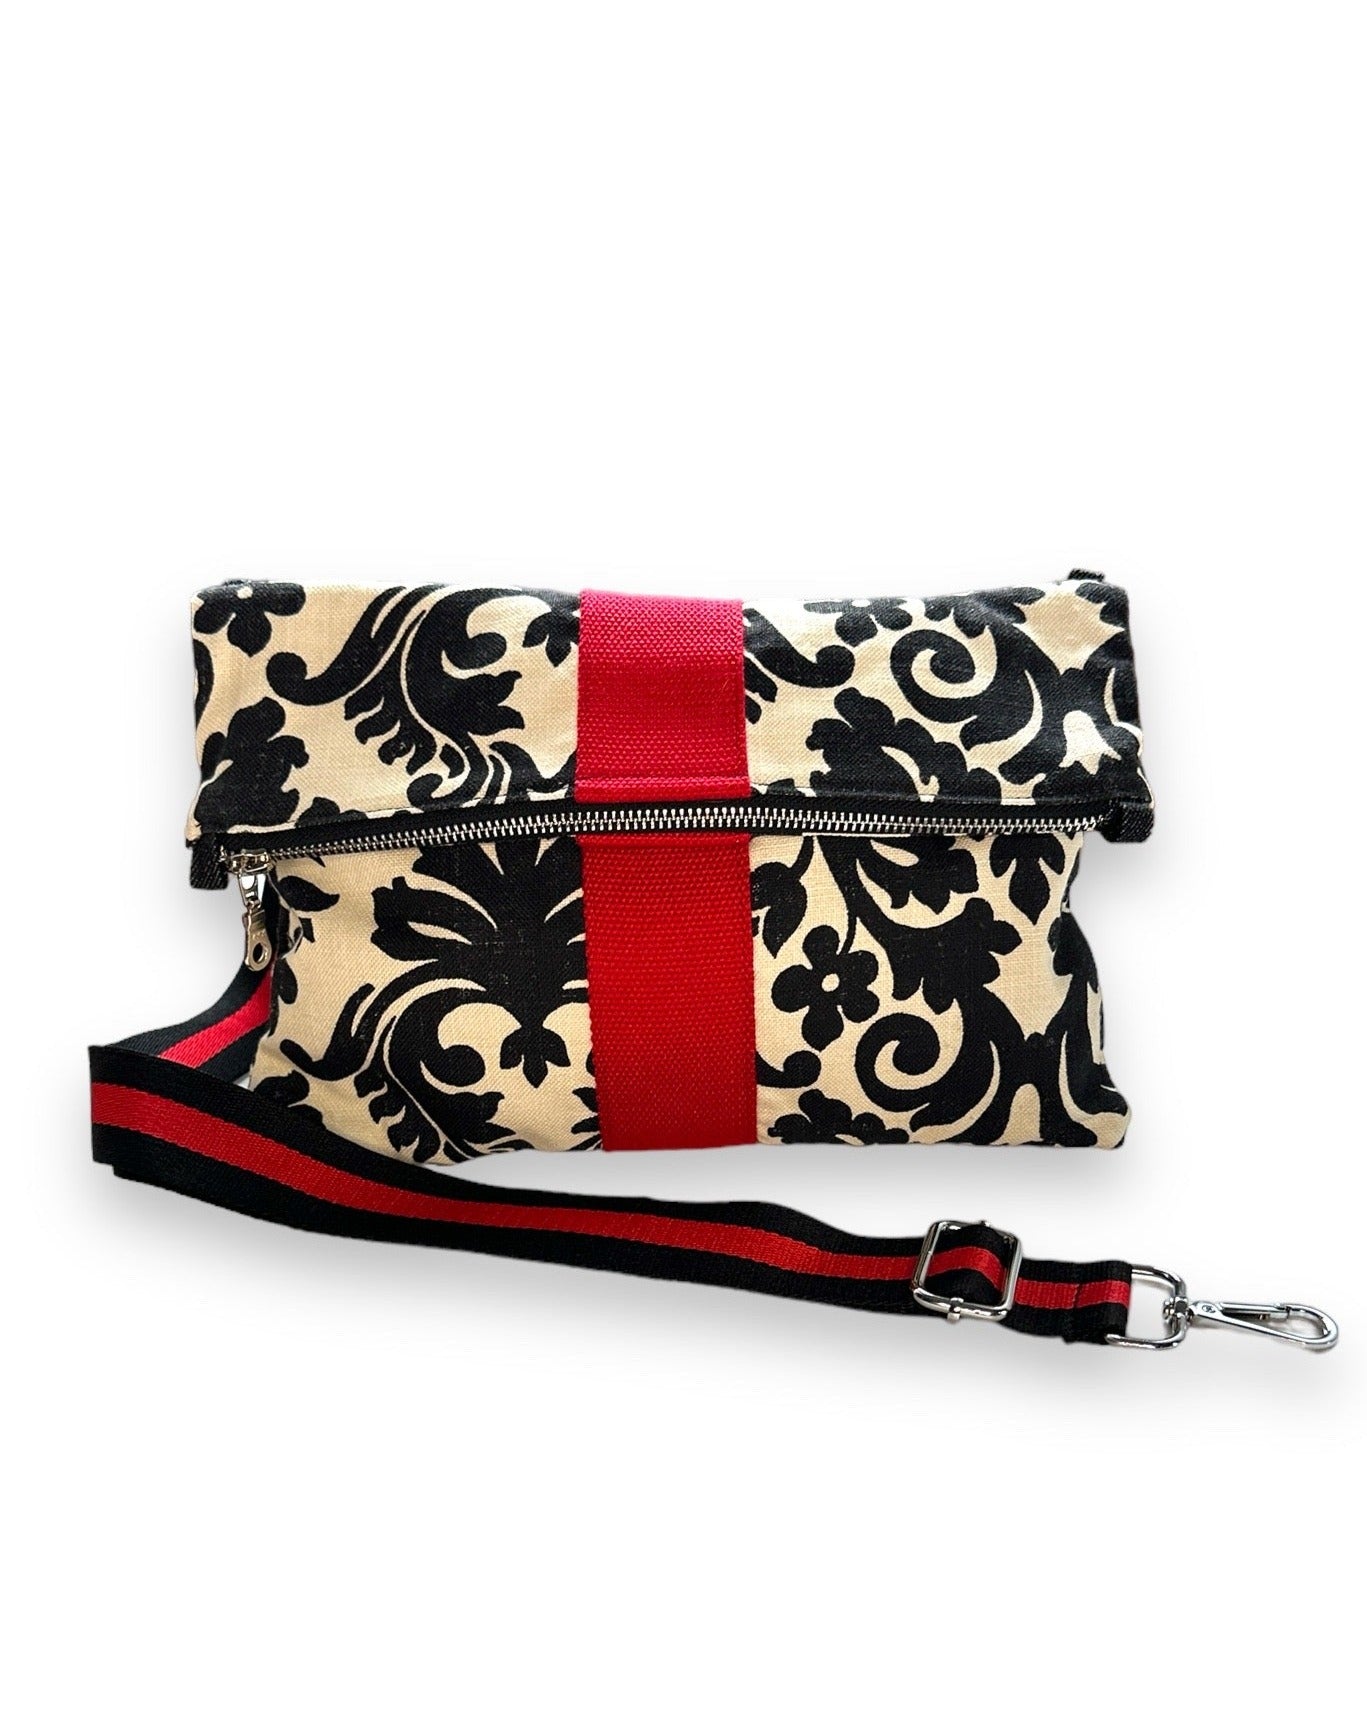 Cream and black foldover clutch with detachable strap. 